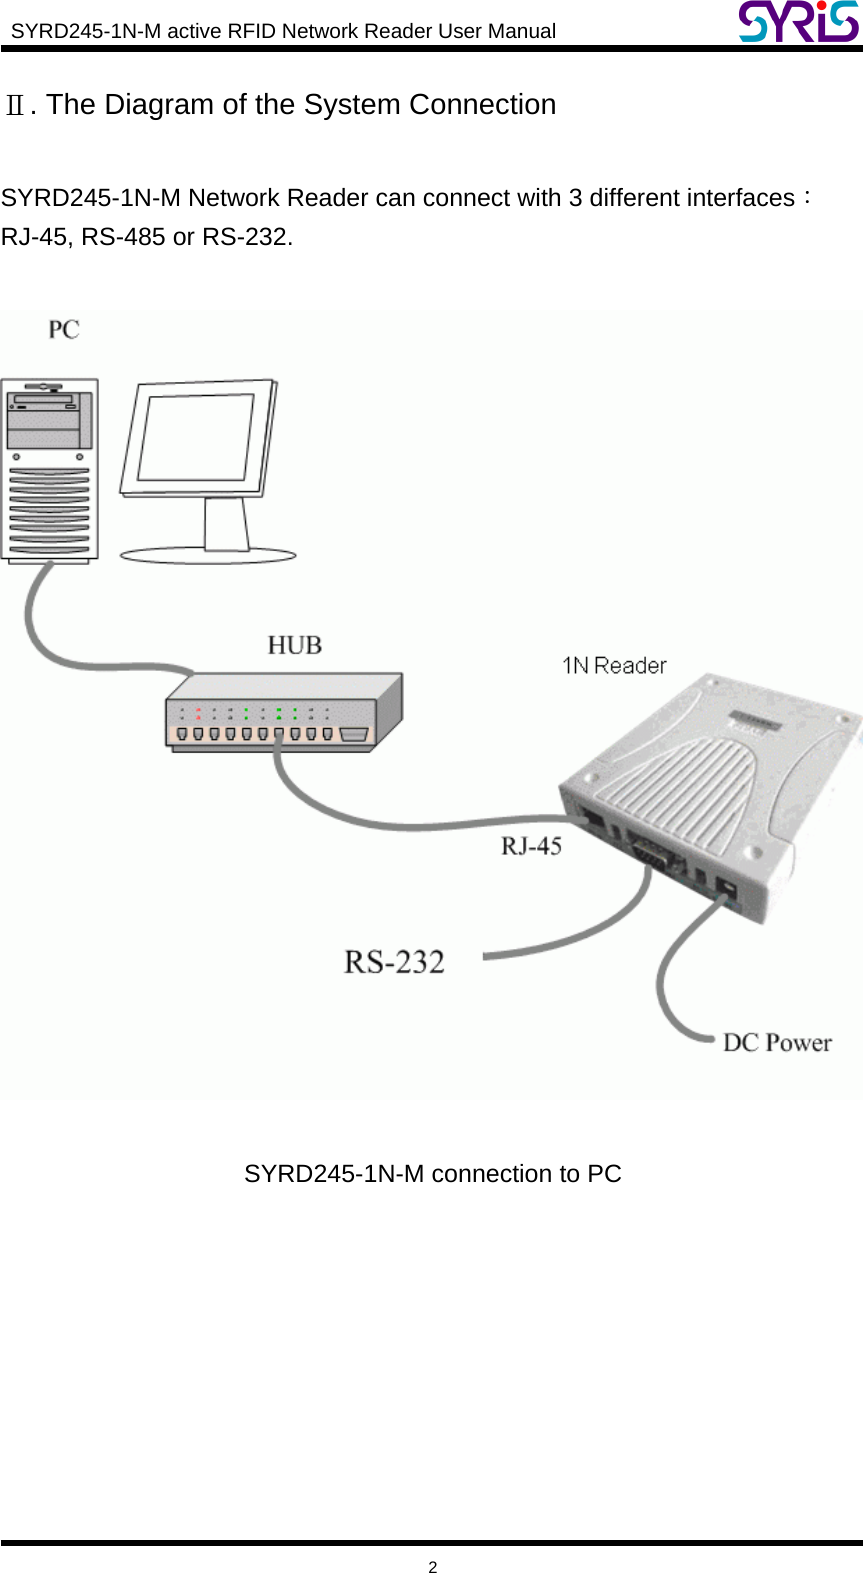  SYRD245-1N-M active RFID Network Reader User Manual     2 Ⅱ. The Diagram of the System Connection  SYRD245-1N-M Network Reader can connect with 3 different interfaces：RJ-45, RS-485 or RS-232.    SYRD245-1N-M connection to PC  